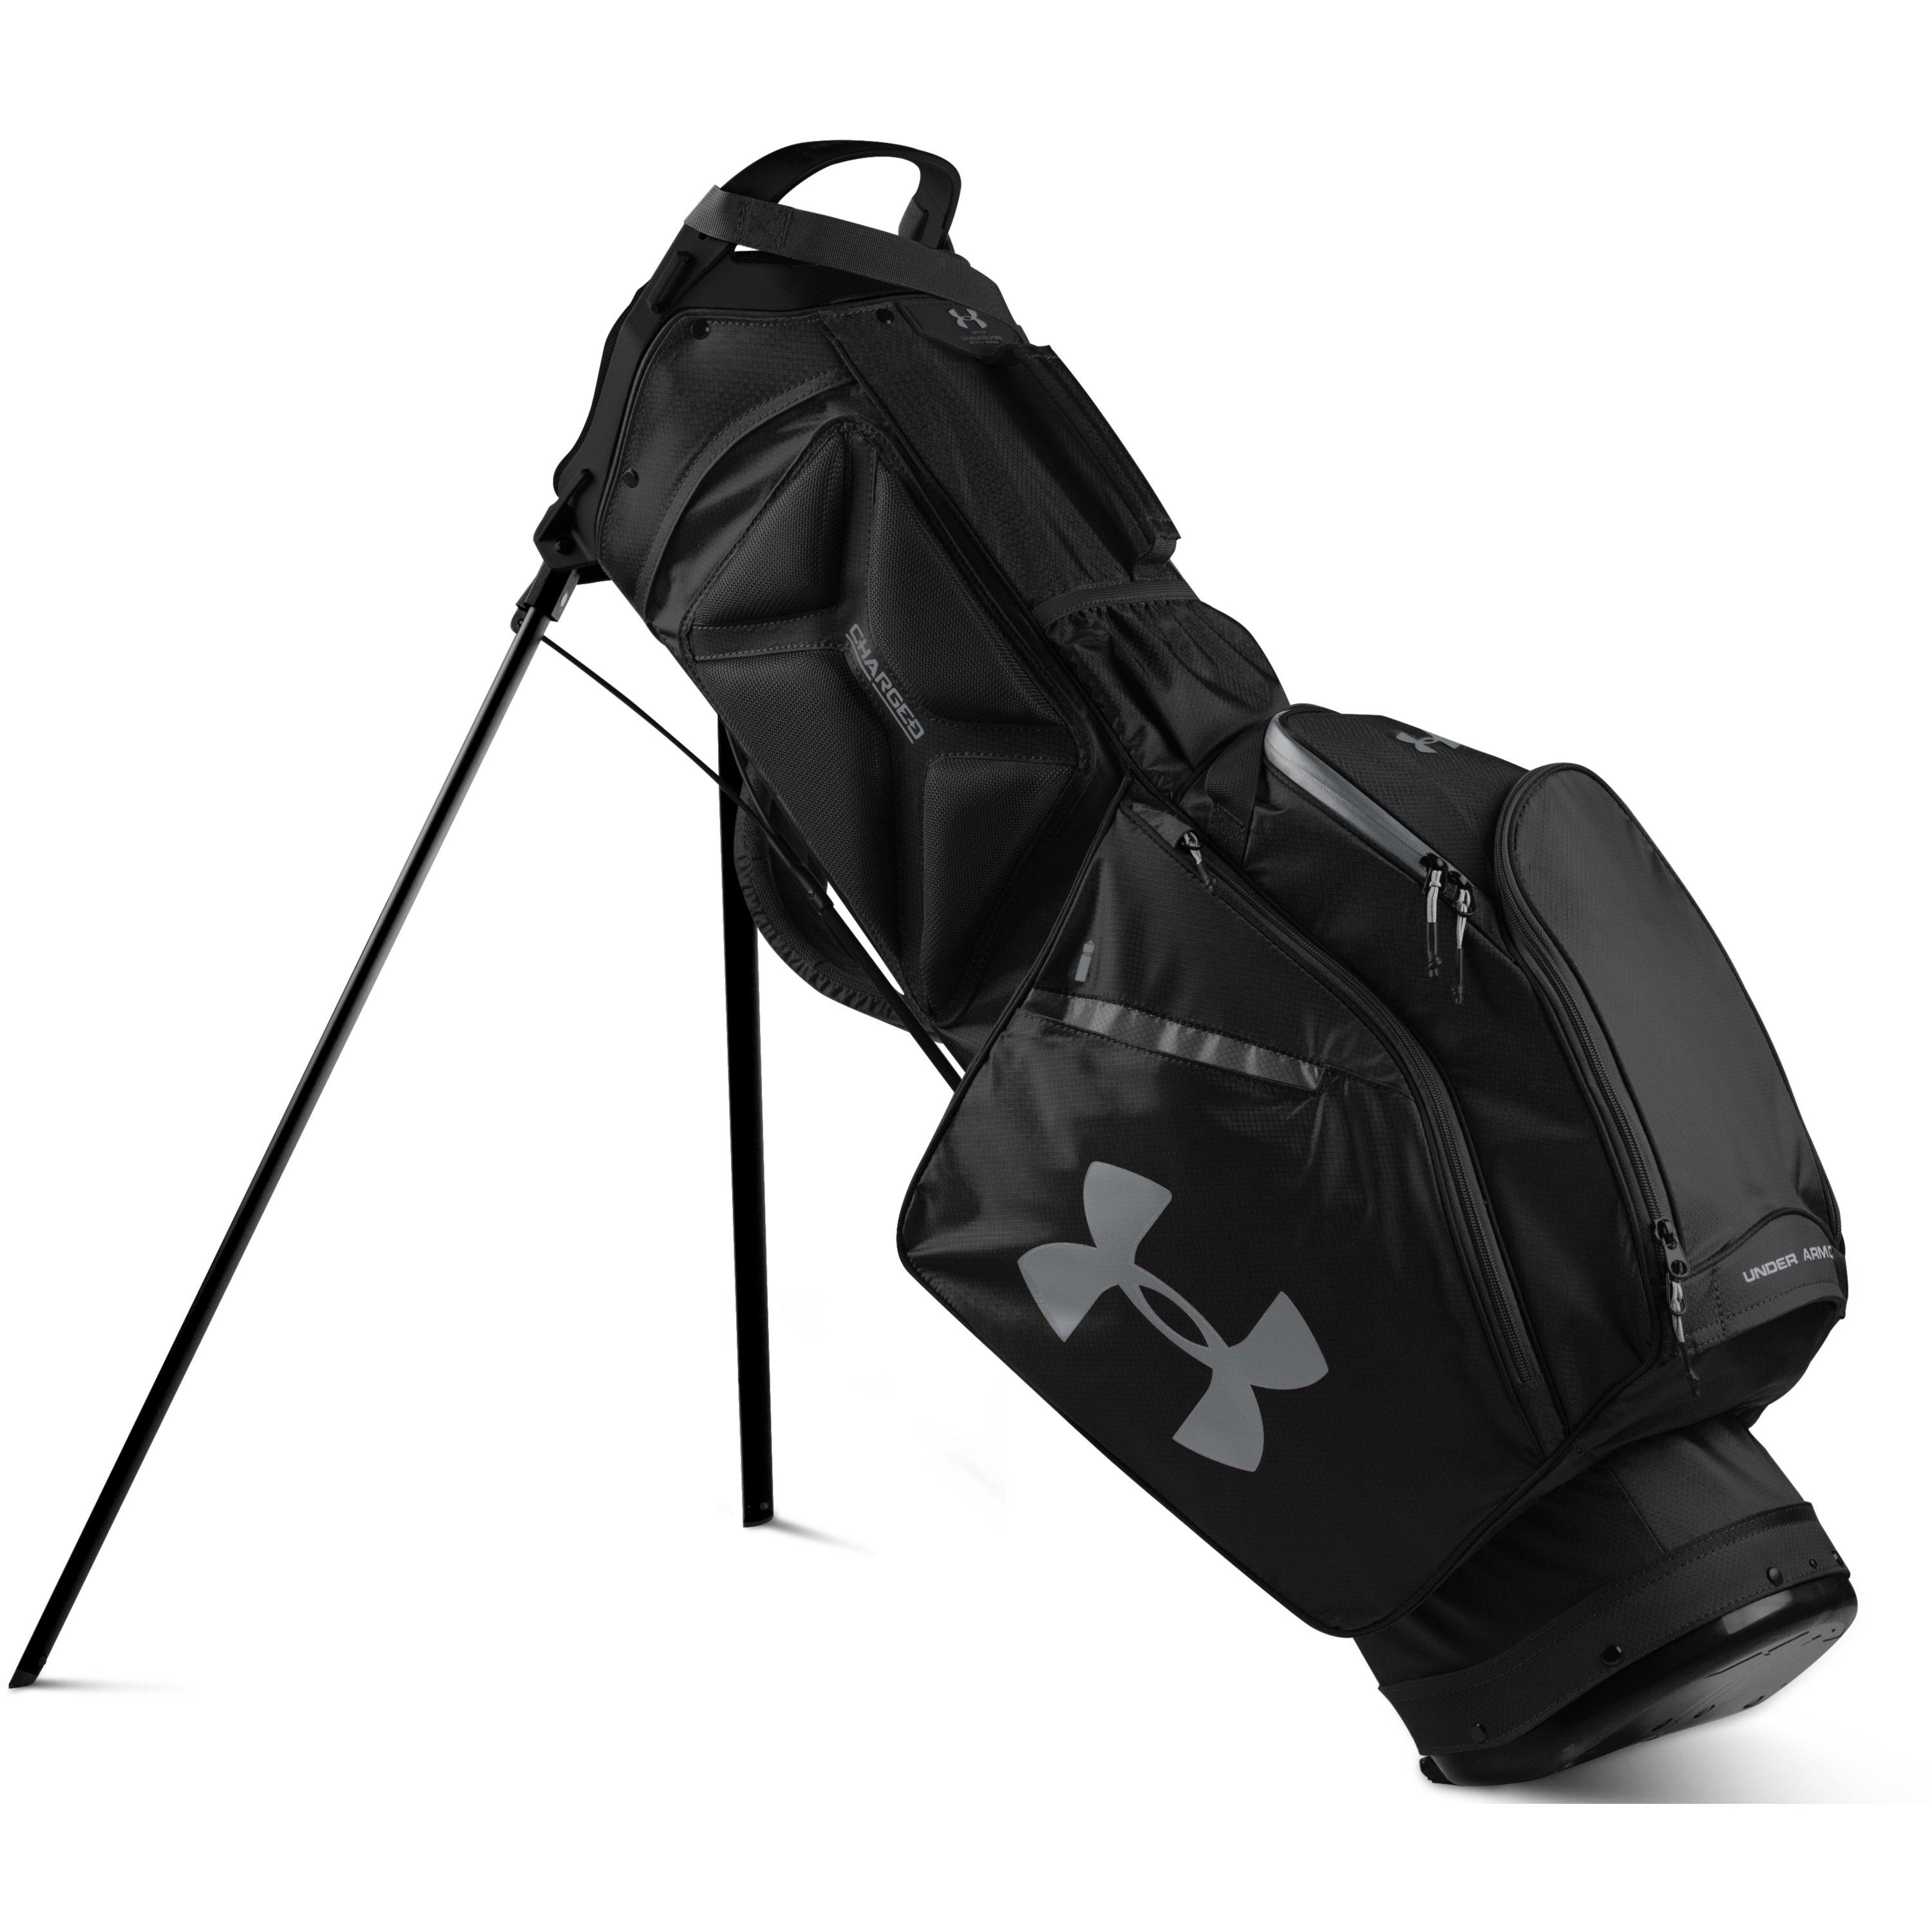 Swing Rite Golf Center Under Armour Bags Now In Stock Facebook |  luxarywedding.com